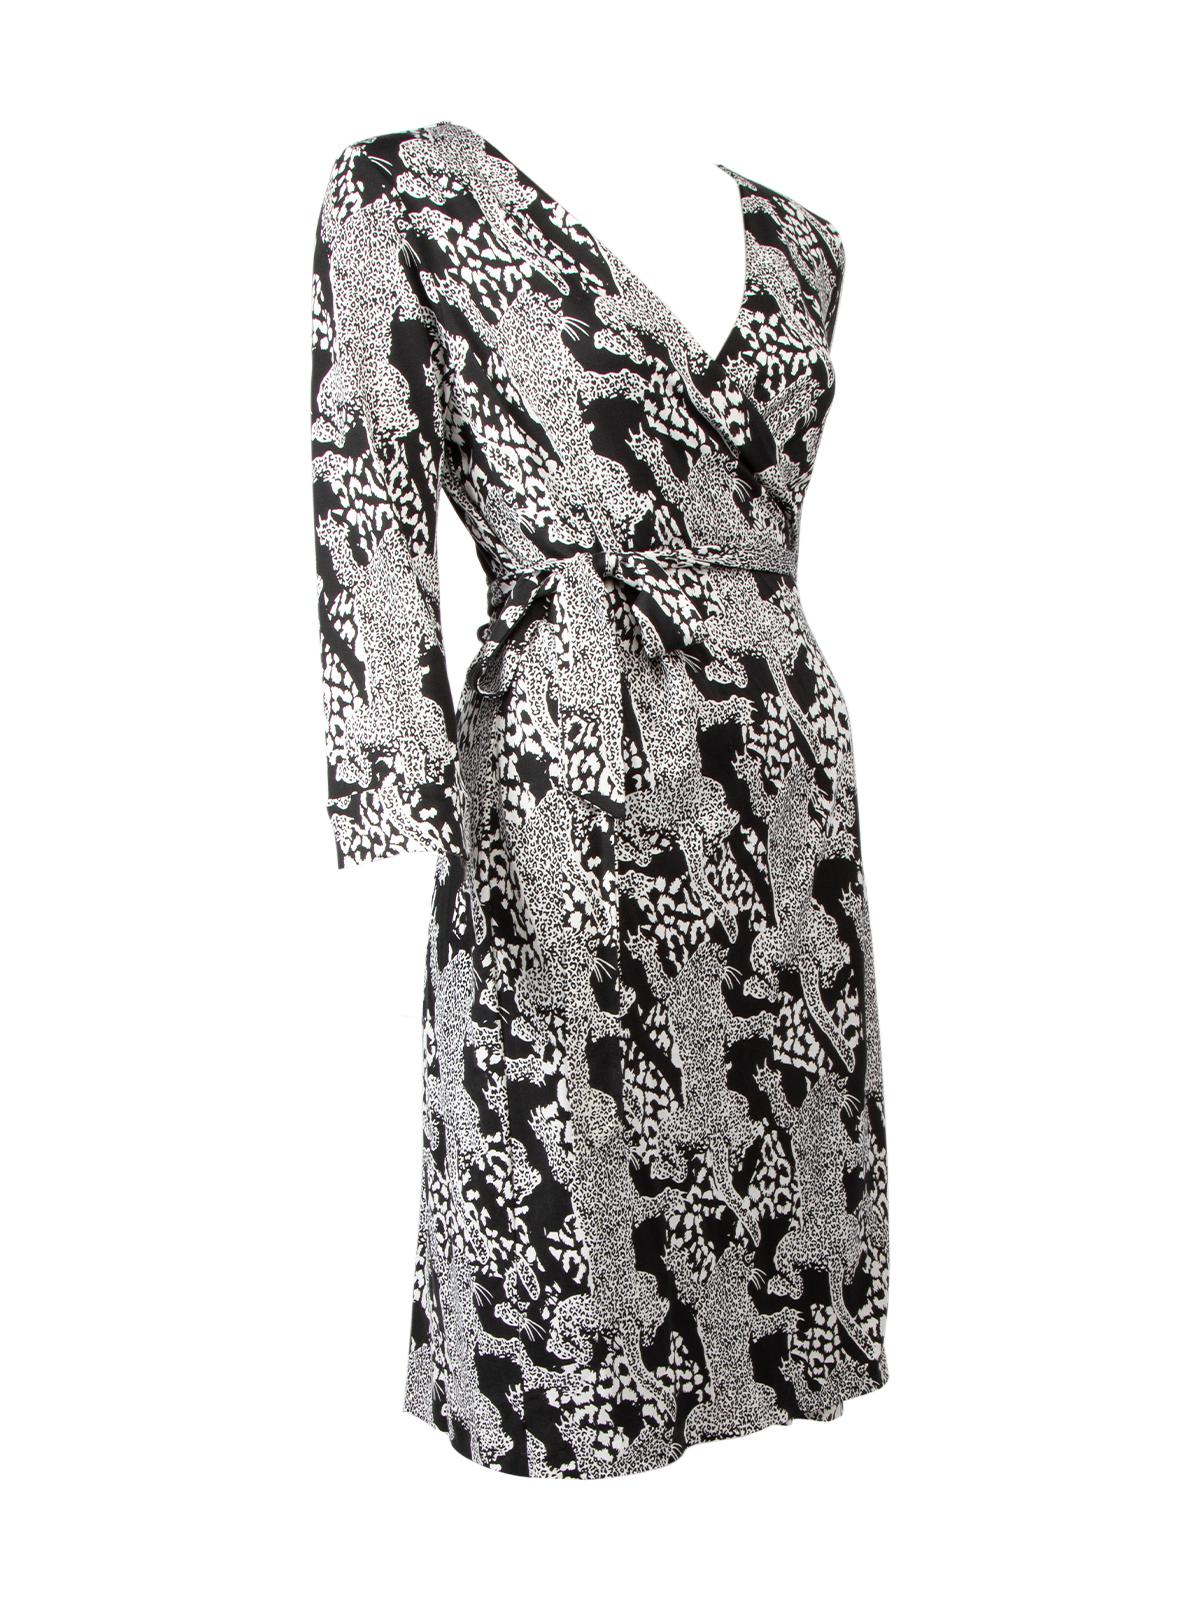 CONDITION is Very good. Hardly any visible wear to dress is evident on this used Diane Von Furstenberg designer resale item. Details Black and white Leopard print Silk Wrap dress V Neck Knee length Short sleeves Made in China Composition 100% (silk)